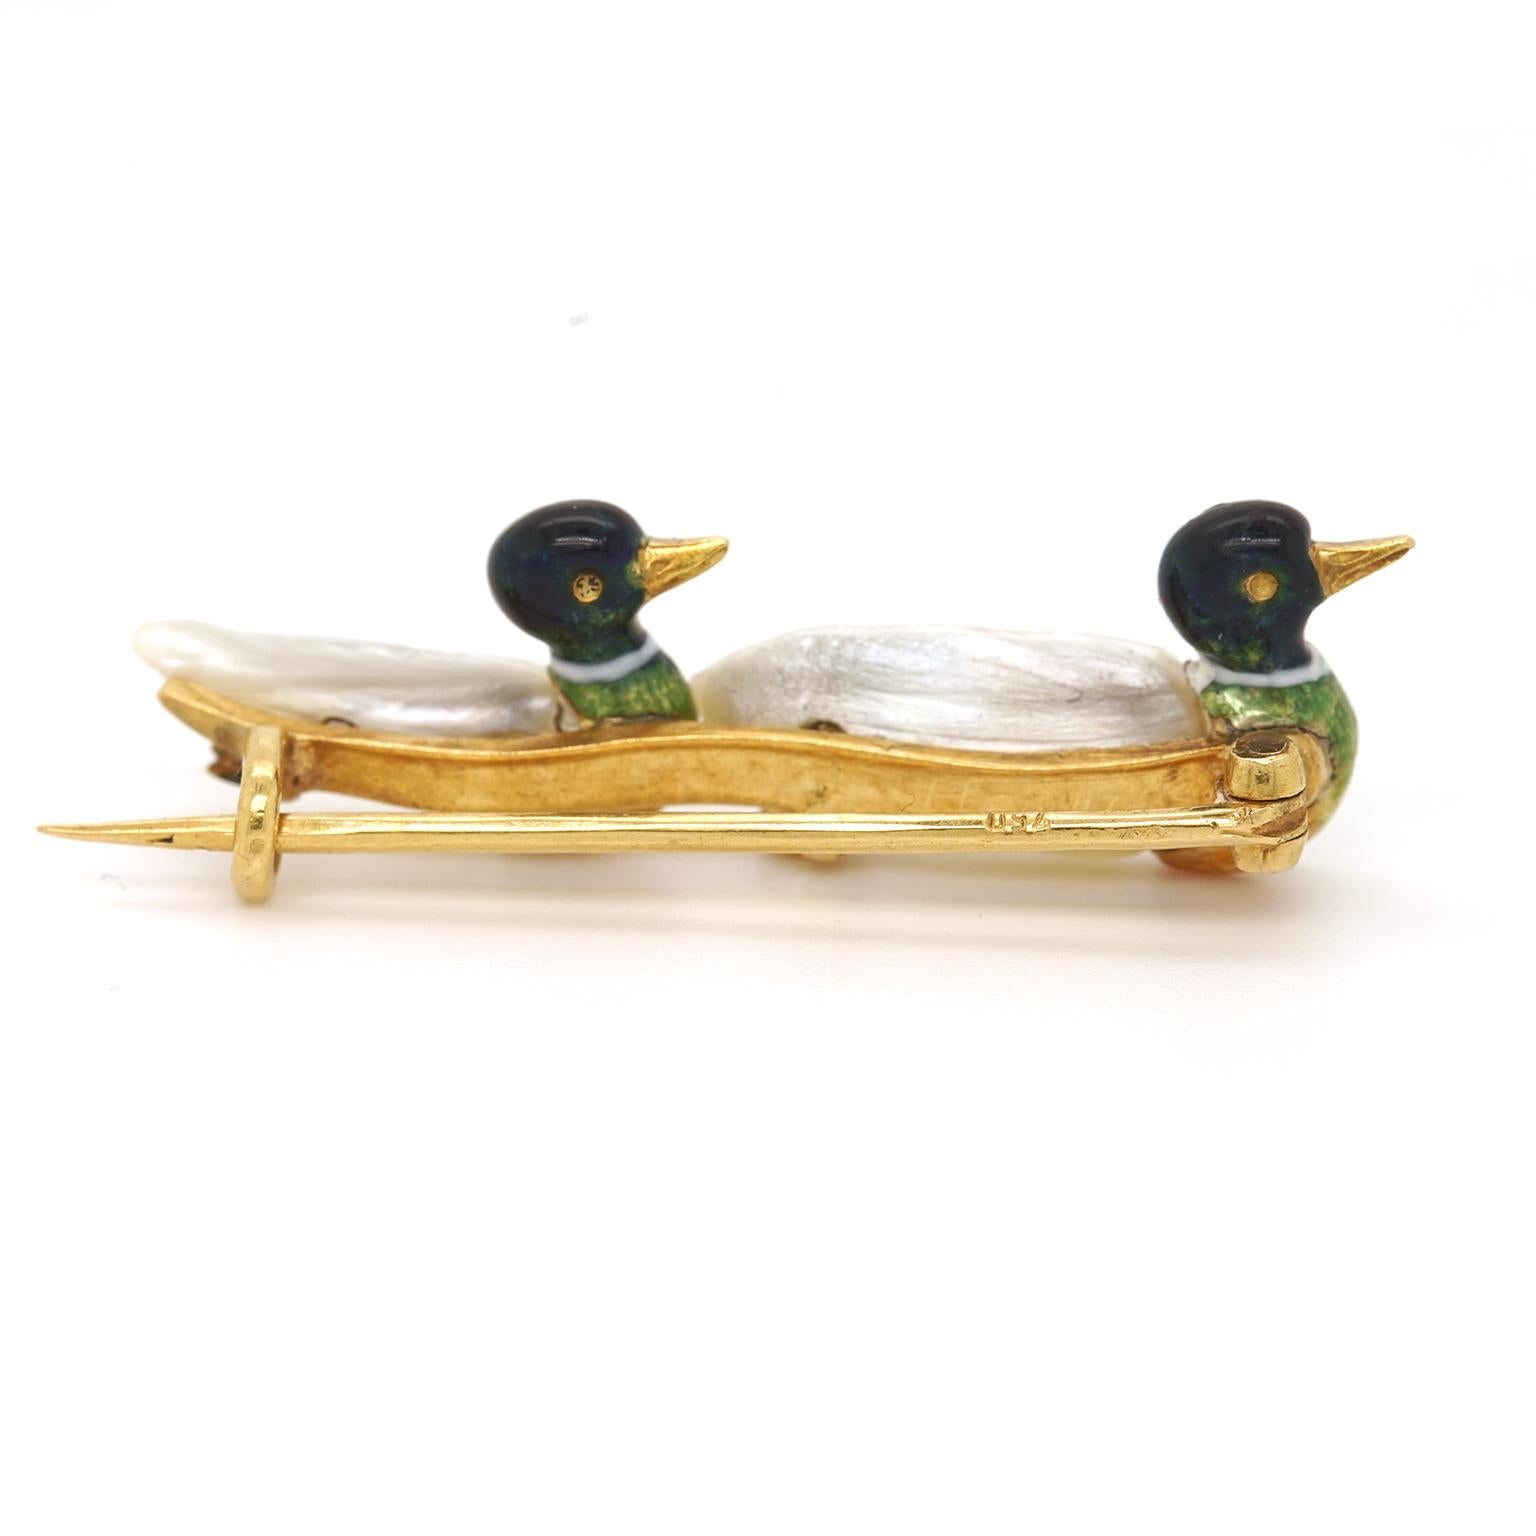 Antique Brooch with Pair of Ducks 1